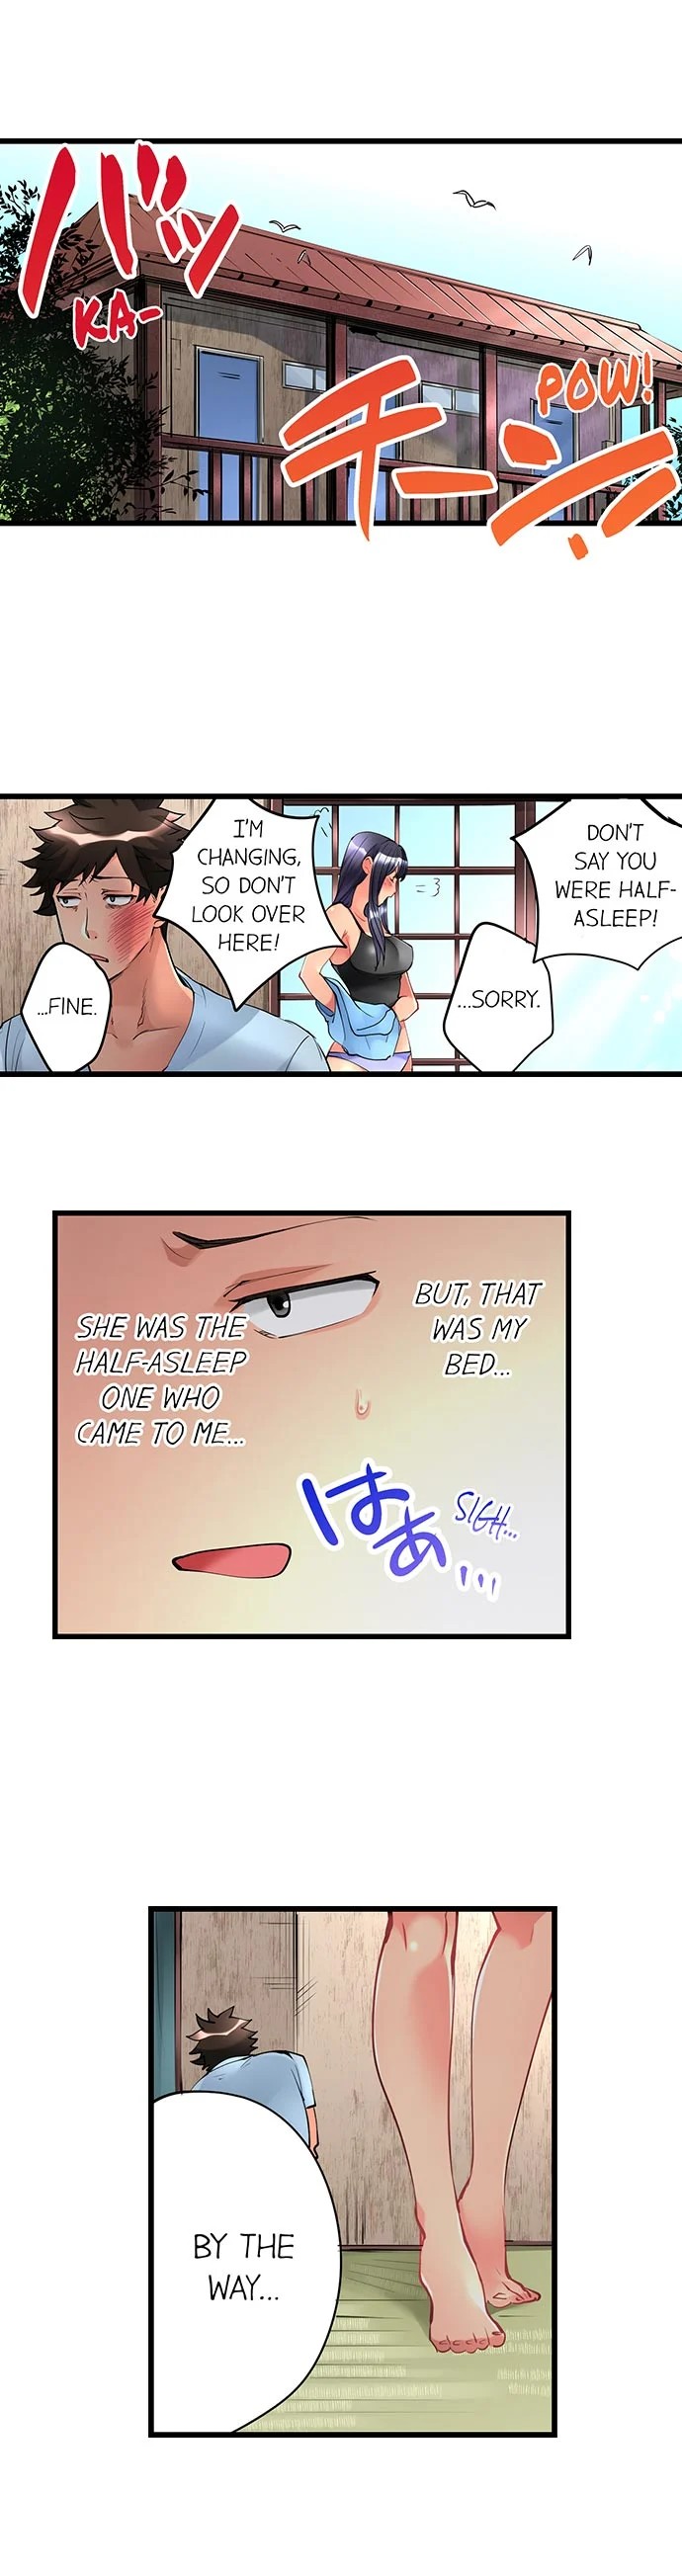 What She Fell On Was The Tip Of My Dick - Chapter 6 Page 7